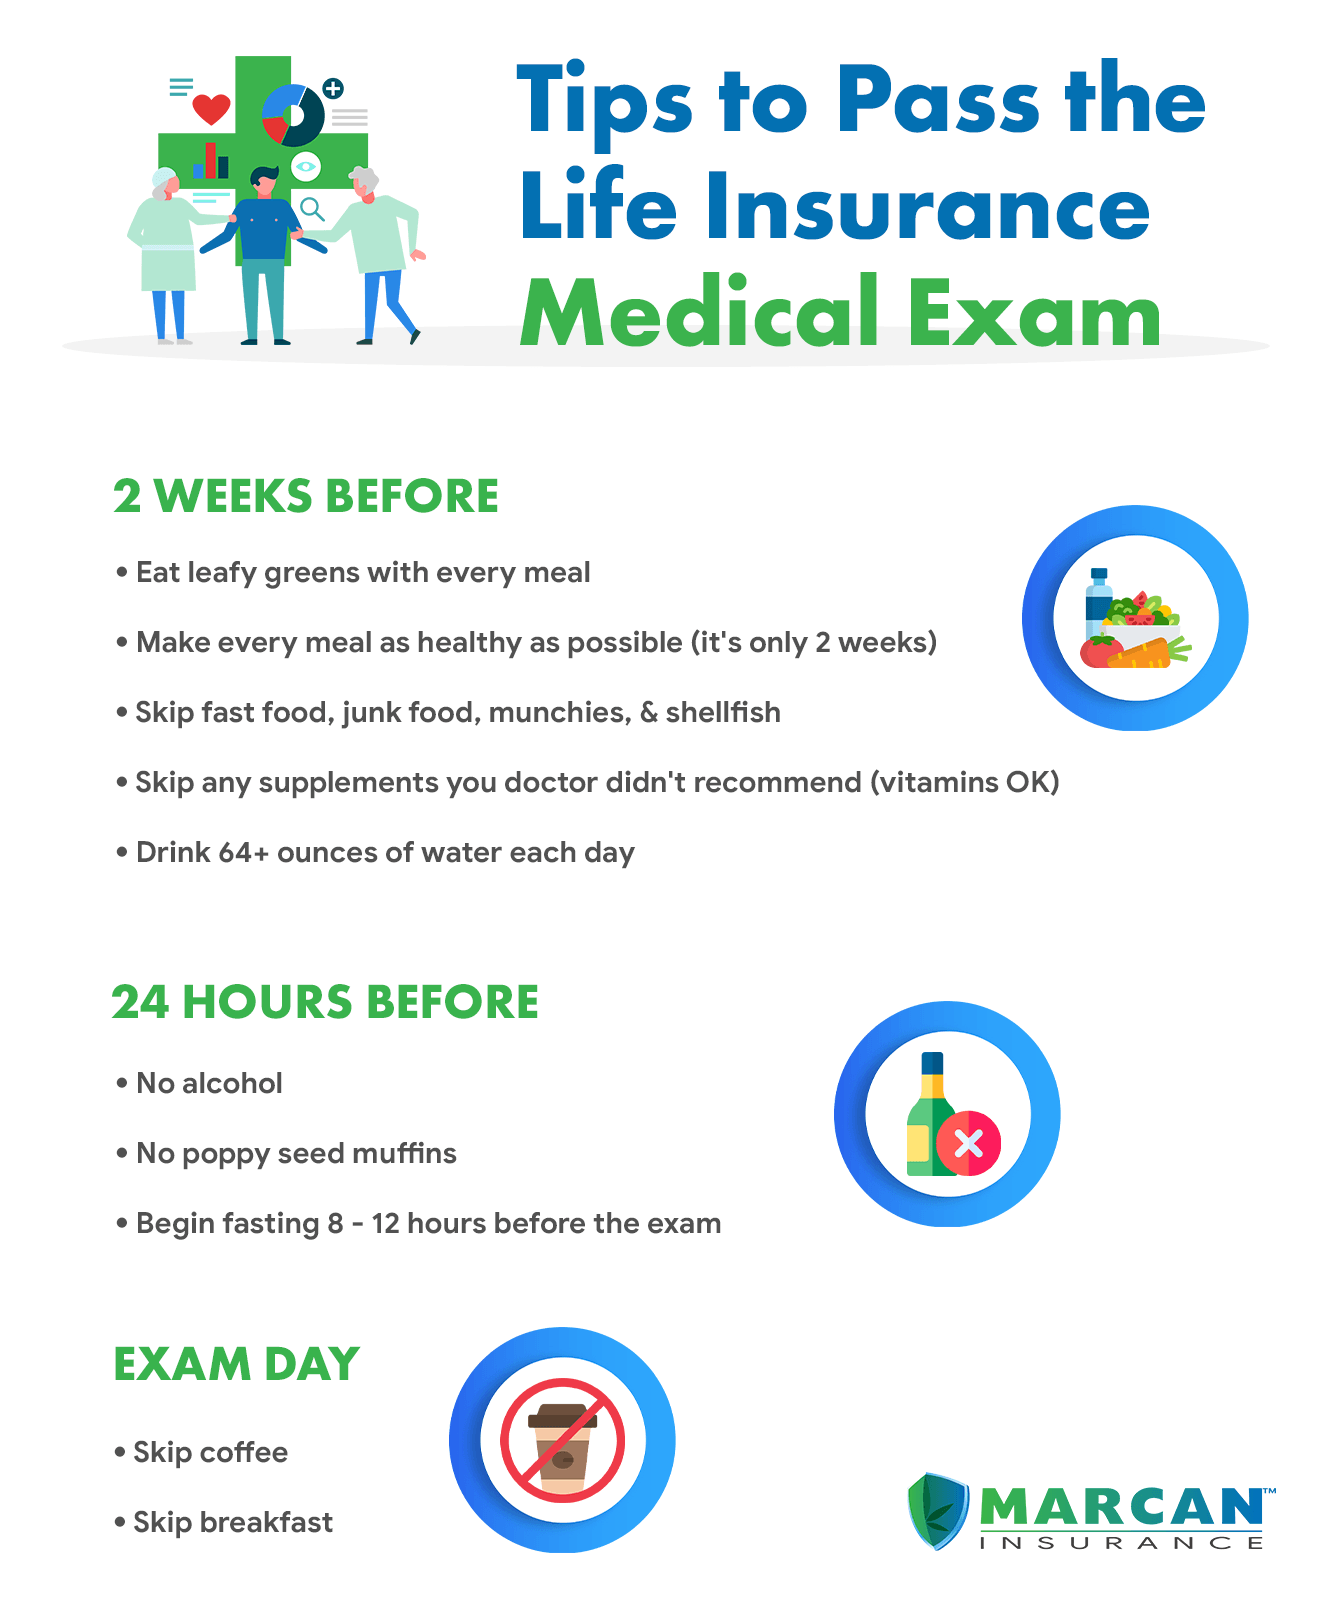 how to pass life insurance medical exam?